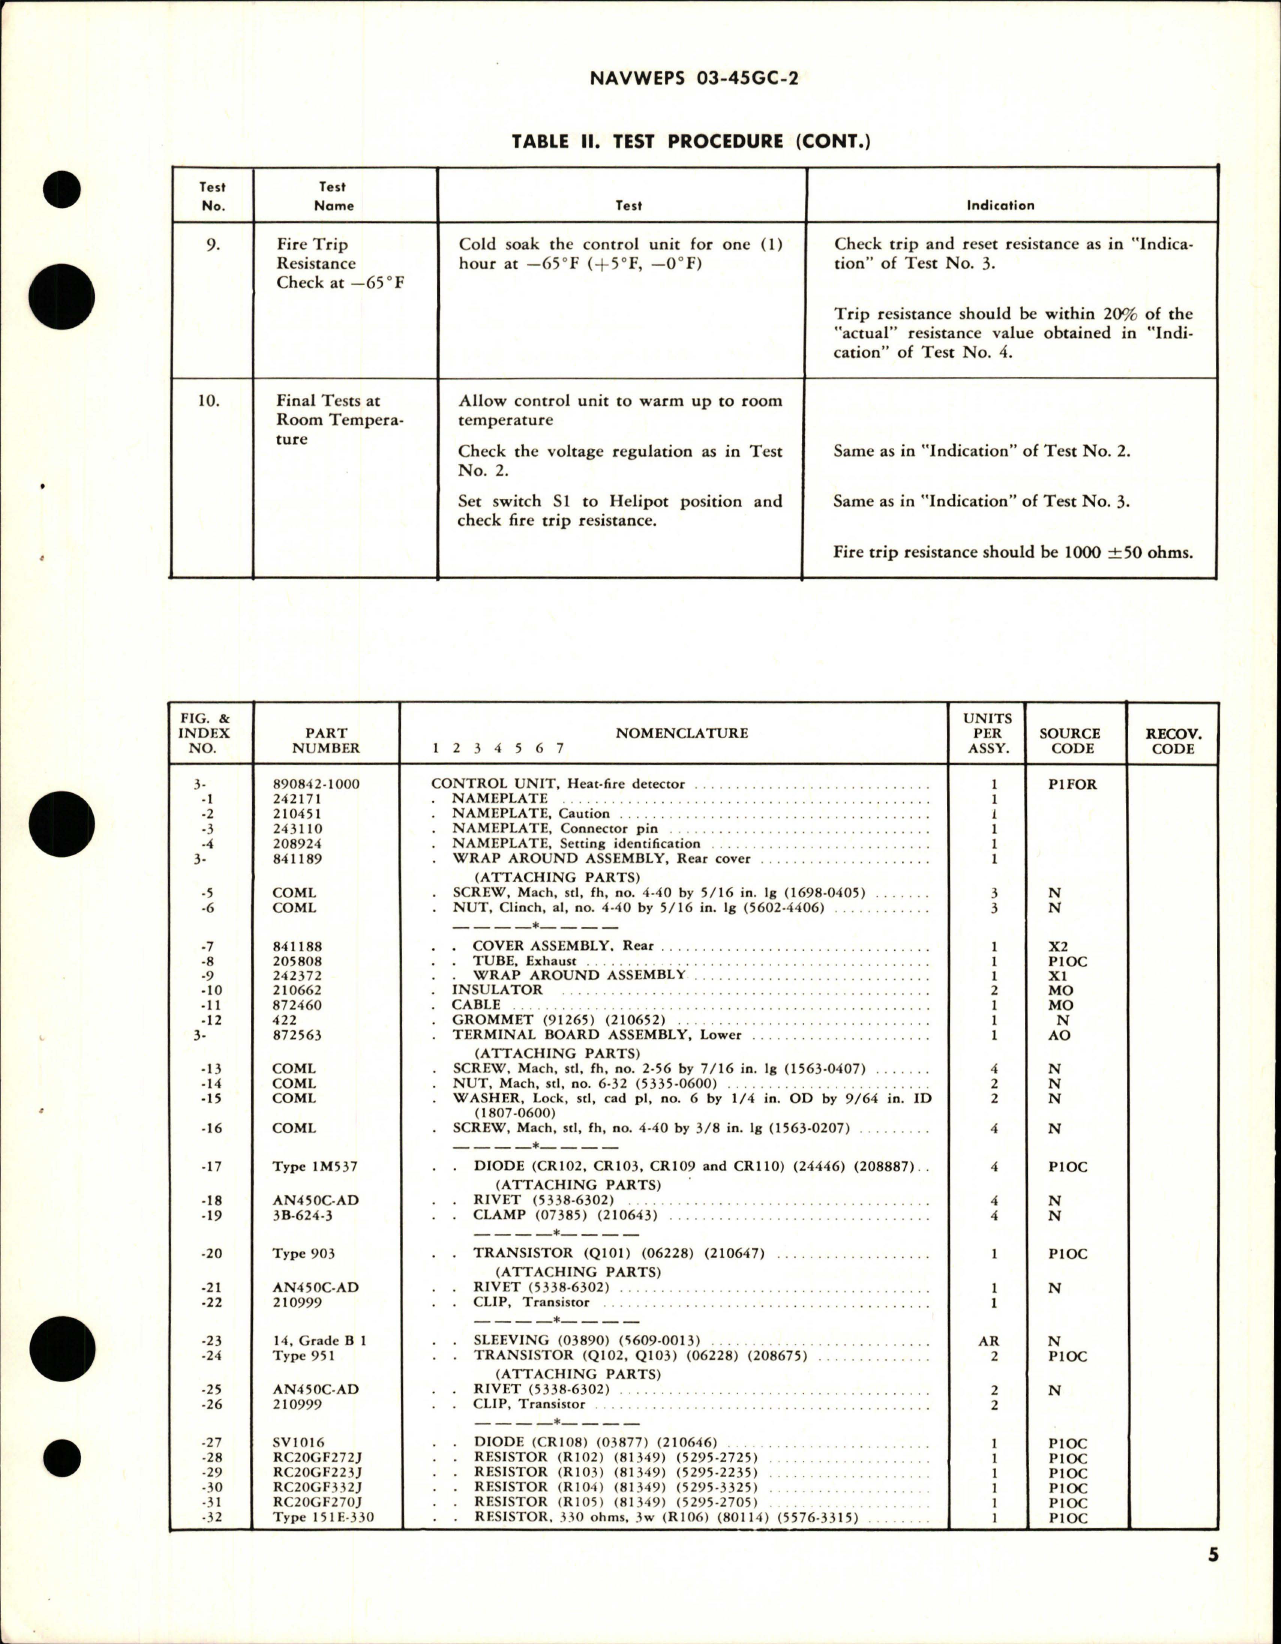 Sample page 5 from AirCorps Library document: Overhaul Instructions with Parts Breakdown for Heat Fire Detector Control Unit - Part 890842-1000